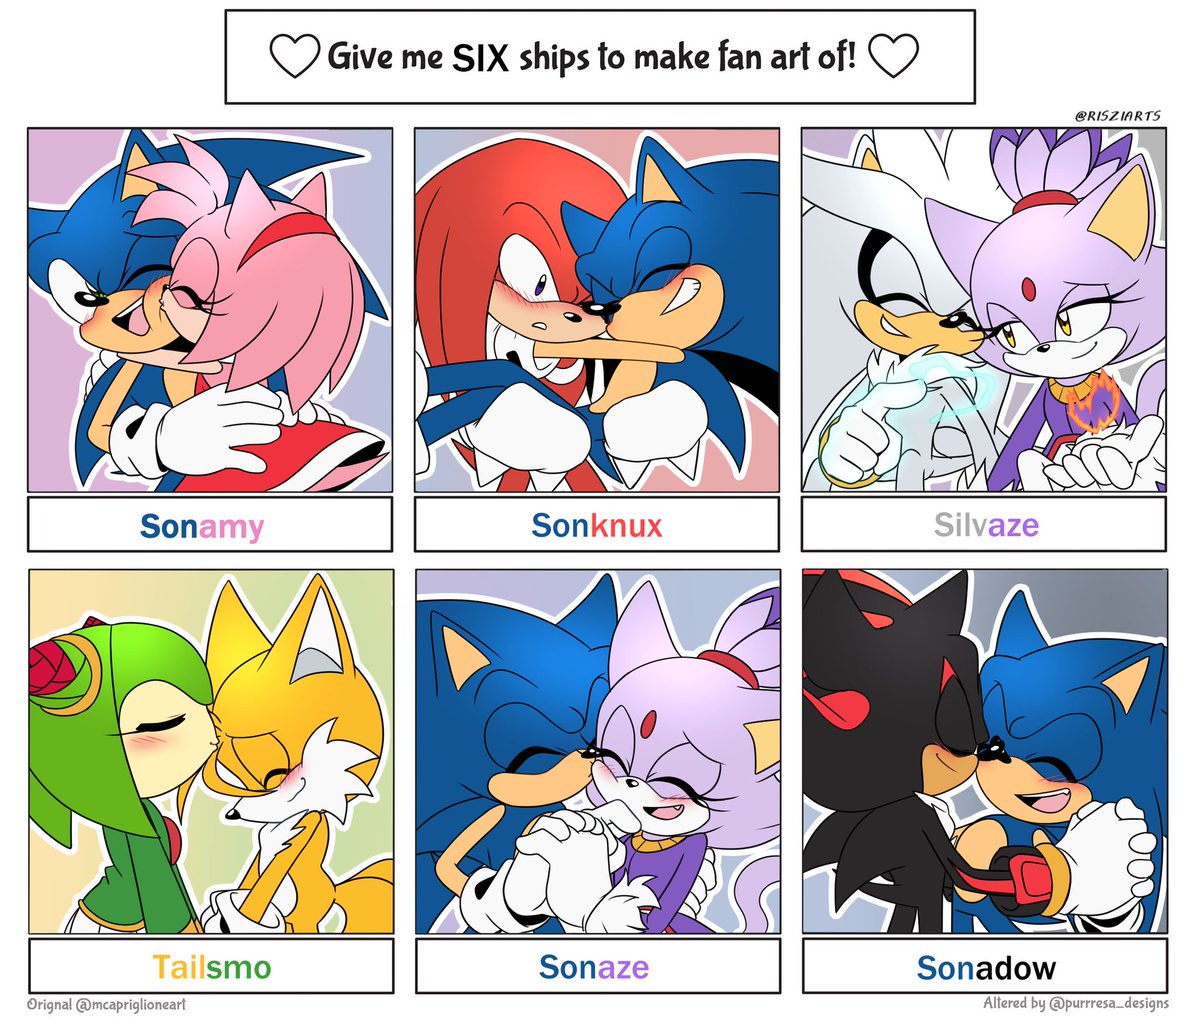 Here they are! Thank you for all the suggestions!
#Sonic #SonicCouples #SonicShips